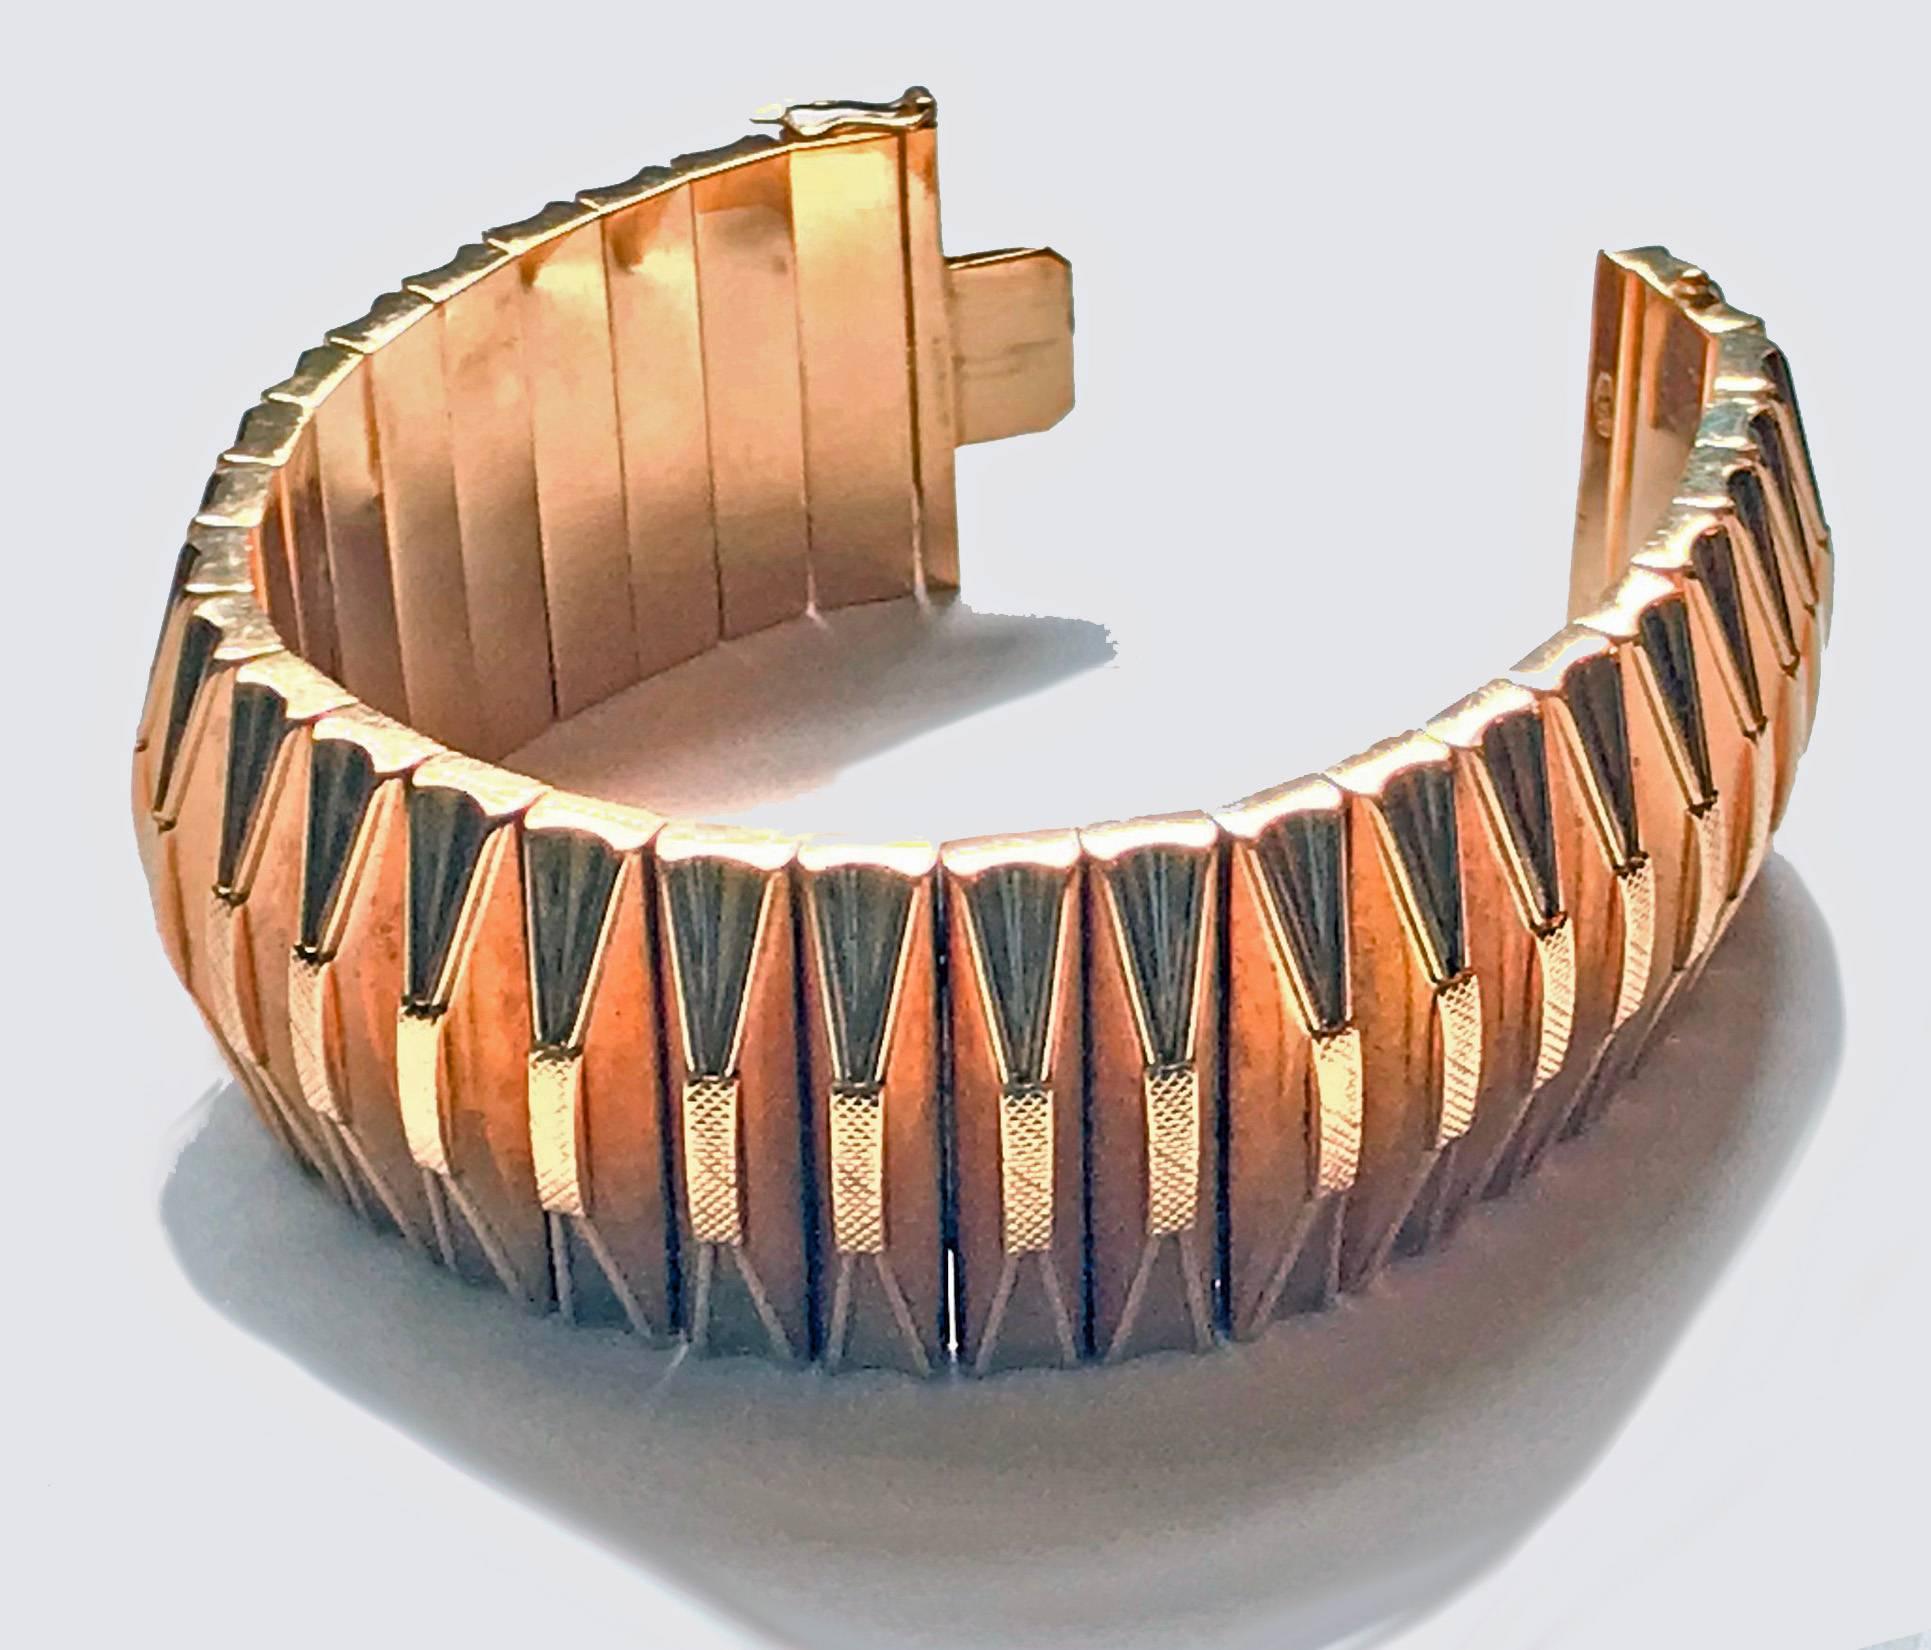 1960’s 18K Large Ribbed Gold Bracelet. The large bracelet with hinged links with brushed centres and fan design borders. Italian marks and stamped 750. Width of links: 1.25 inches. Length: 8.25 inches. Total Item Weight: 91.32 grams